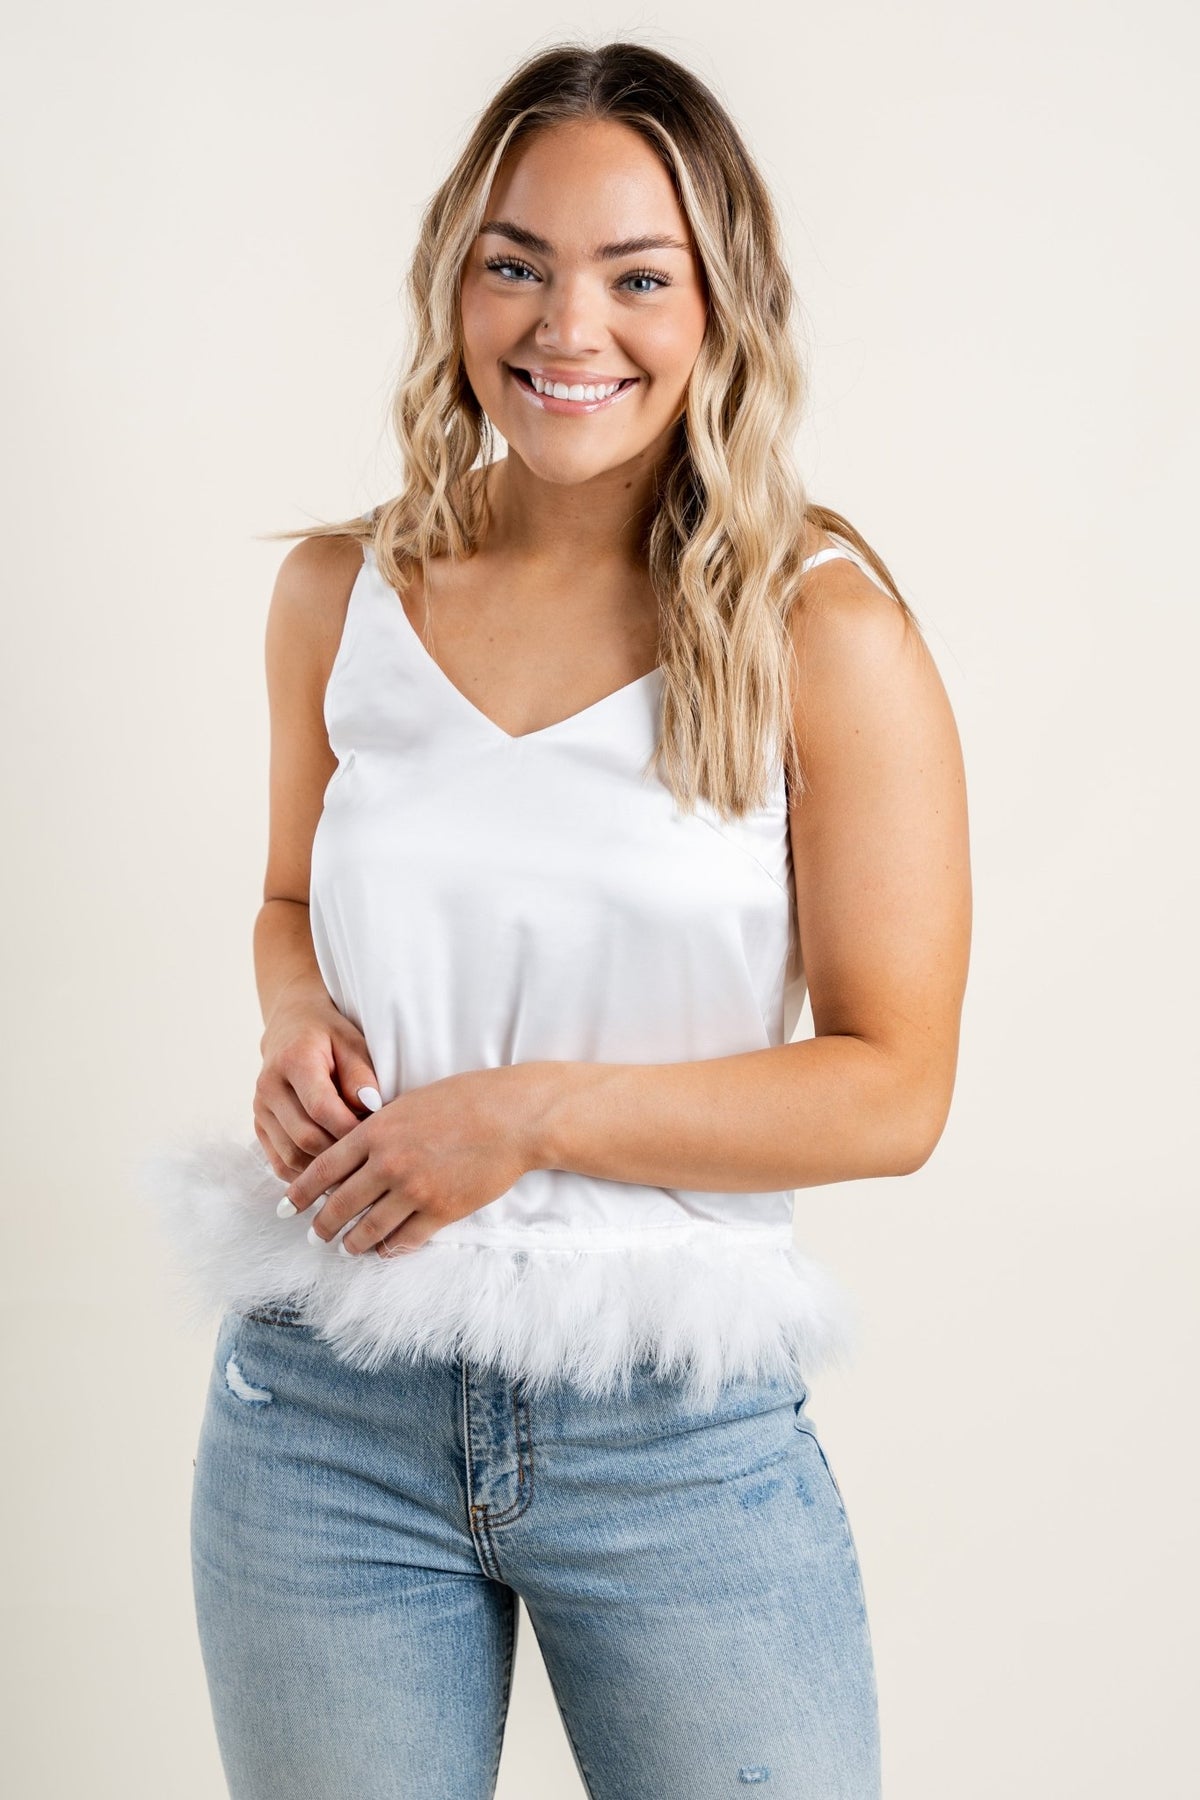 Feather trim cami tank top ivory - Stylish Tank Top -  Cute Bridal Collection at Lush Fashion Lounge Boutique in Oklahoma City